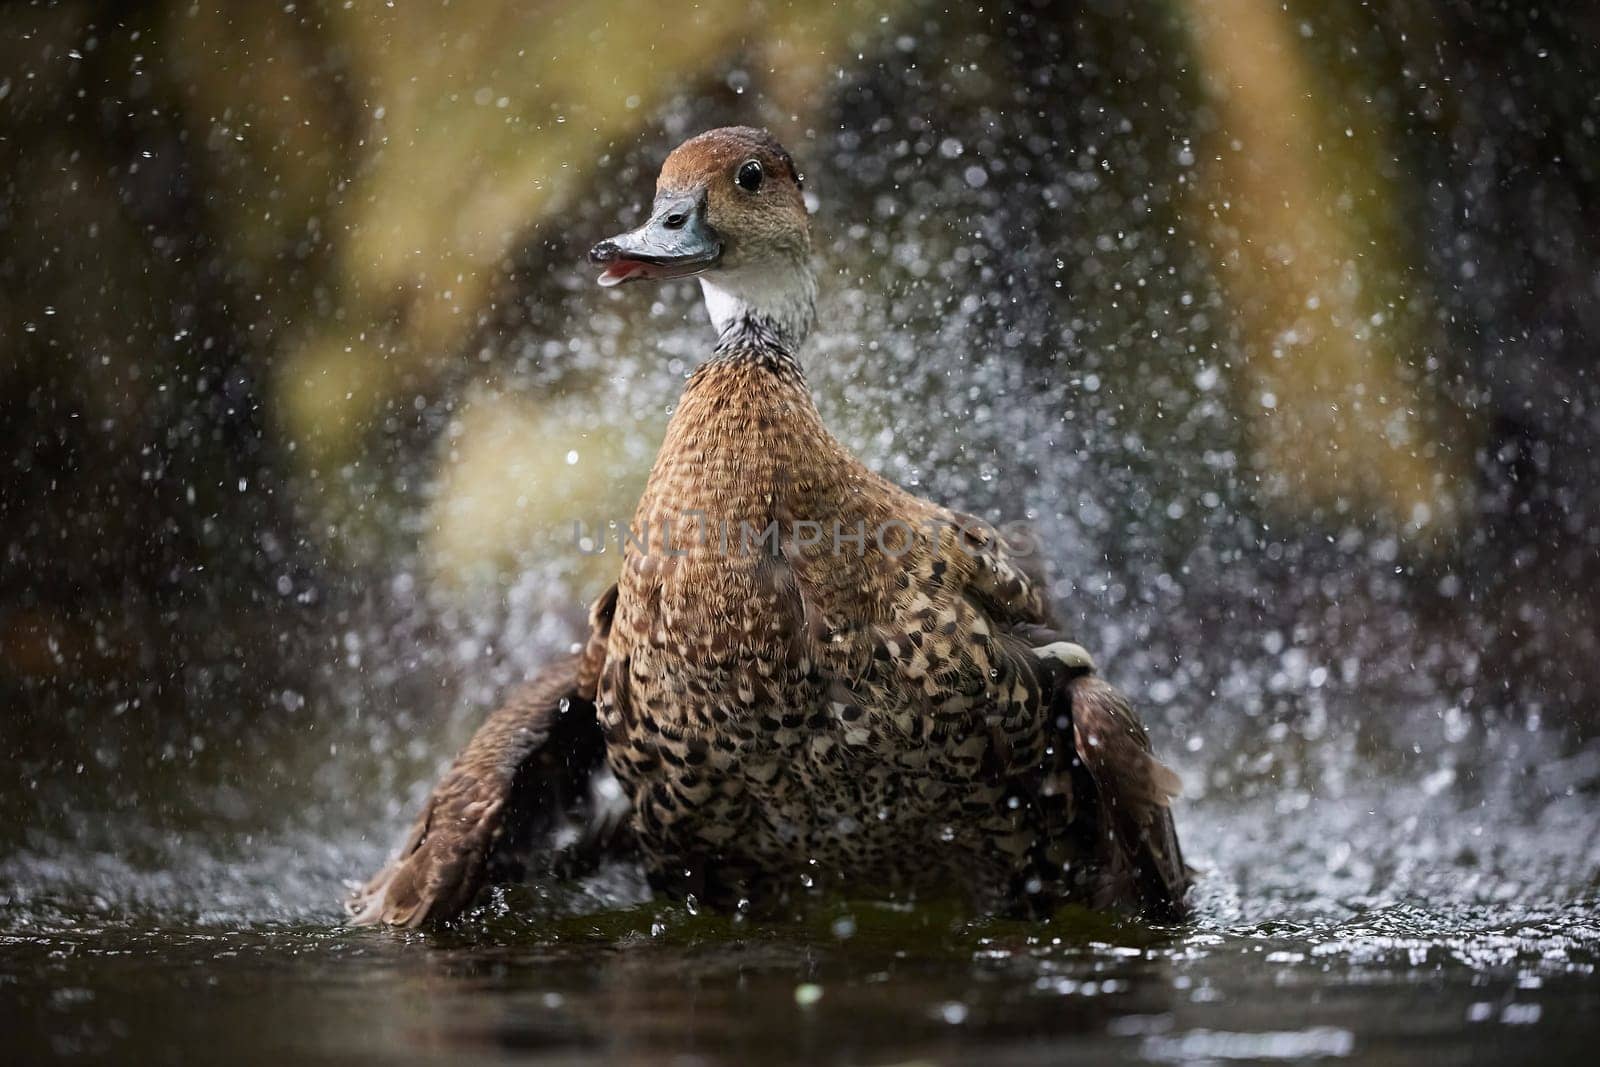 A beautiful duck swims in the water in Denmark. Close-up.